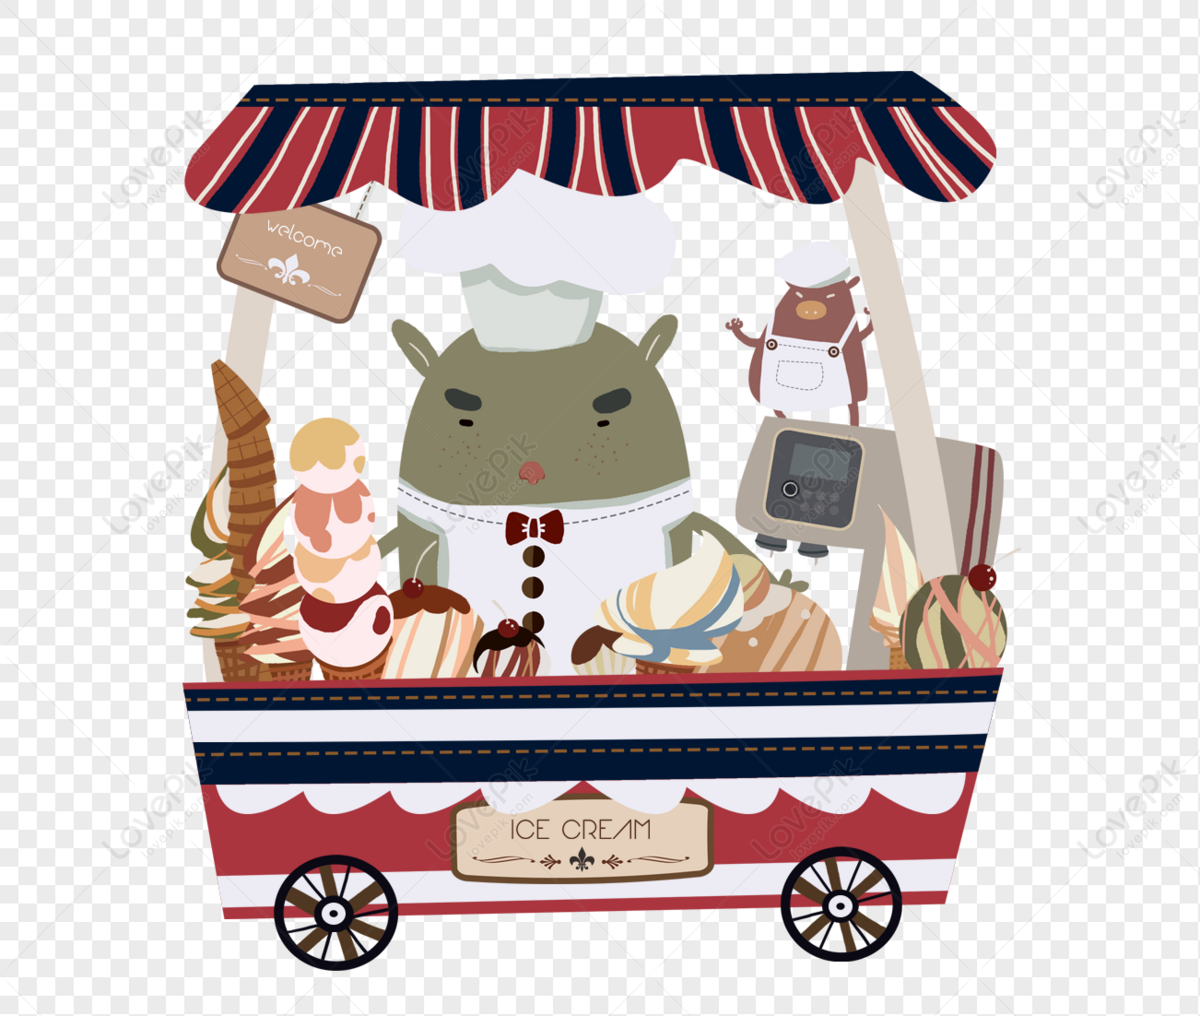 Ice Cream Cartoon Mouse PNG Image And Clipart Image For Free Download -  Lovepik | 400238768